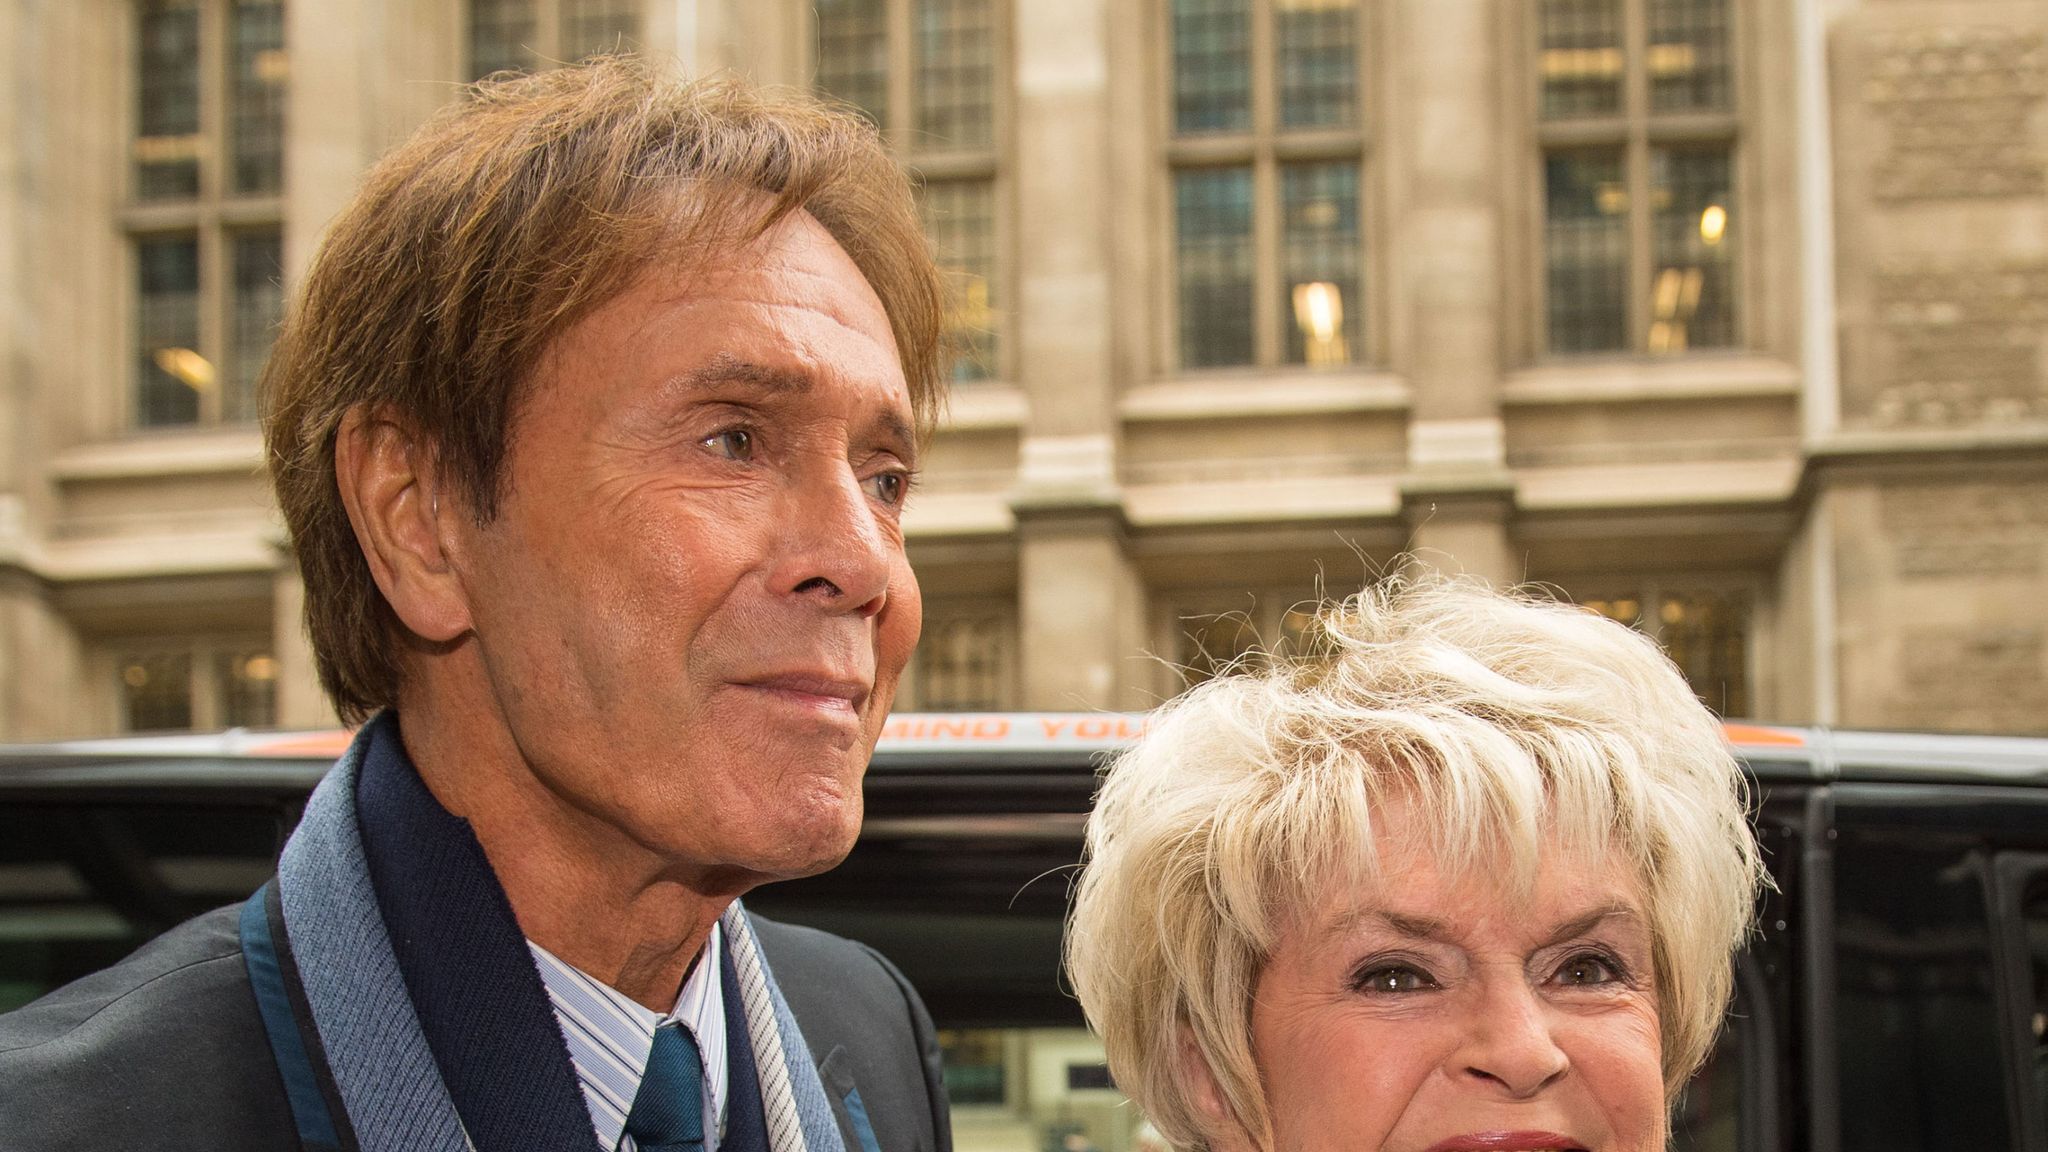 Sir Cliff Richard breaks down in tears as he gives evidence during